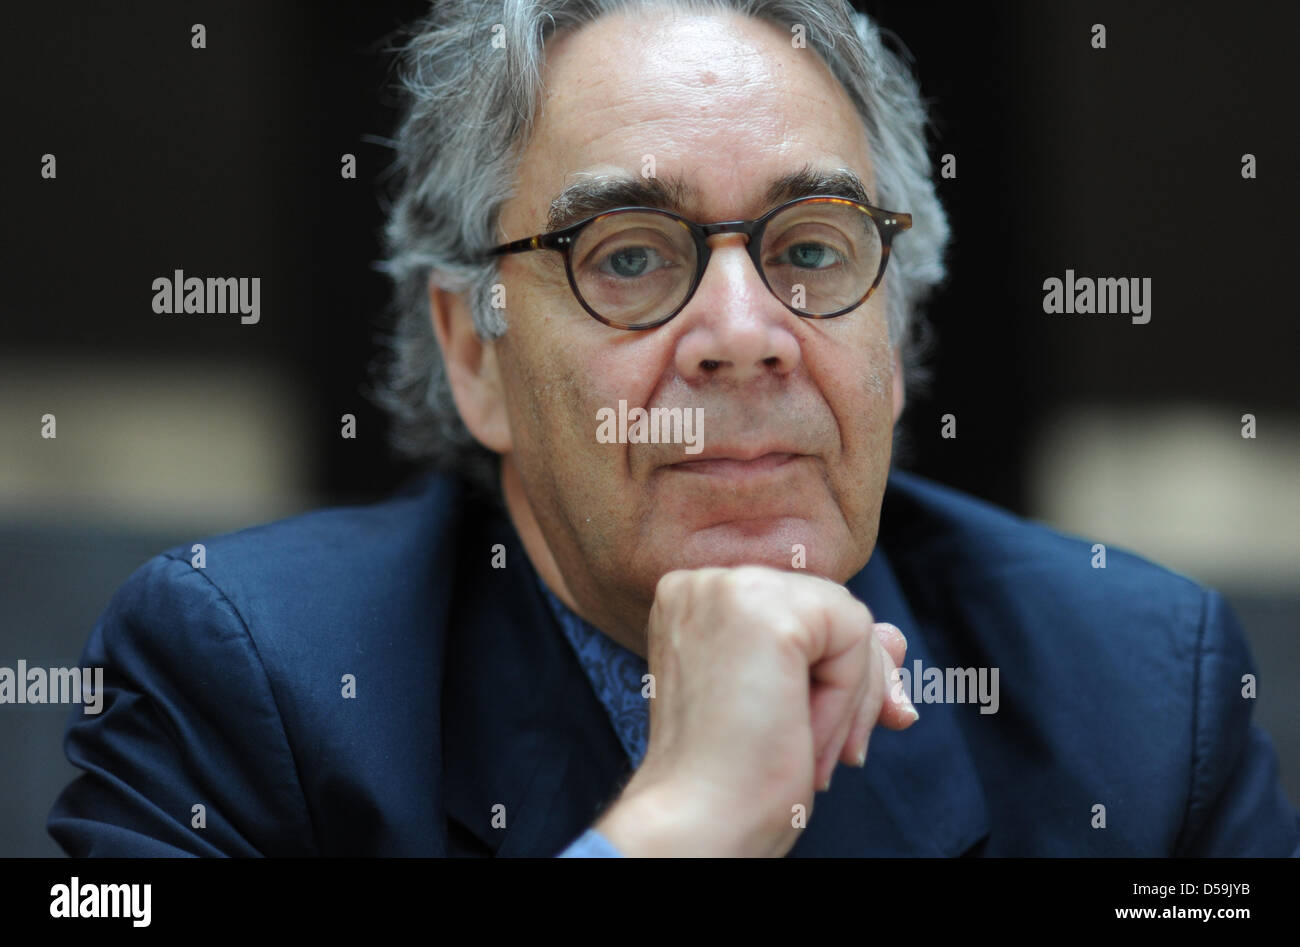 Canadian soundtrack composer Howard Leslie Shore poses during an interview in Munich, Germany on 26 June 2010. Born on 18 October 1946, Shore has composed the original soundtracks to more than 40 film including 'The Lord of the Rings'. Photo: Andreas Gebert Stock Photo